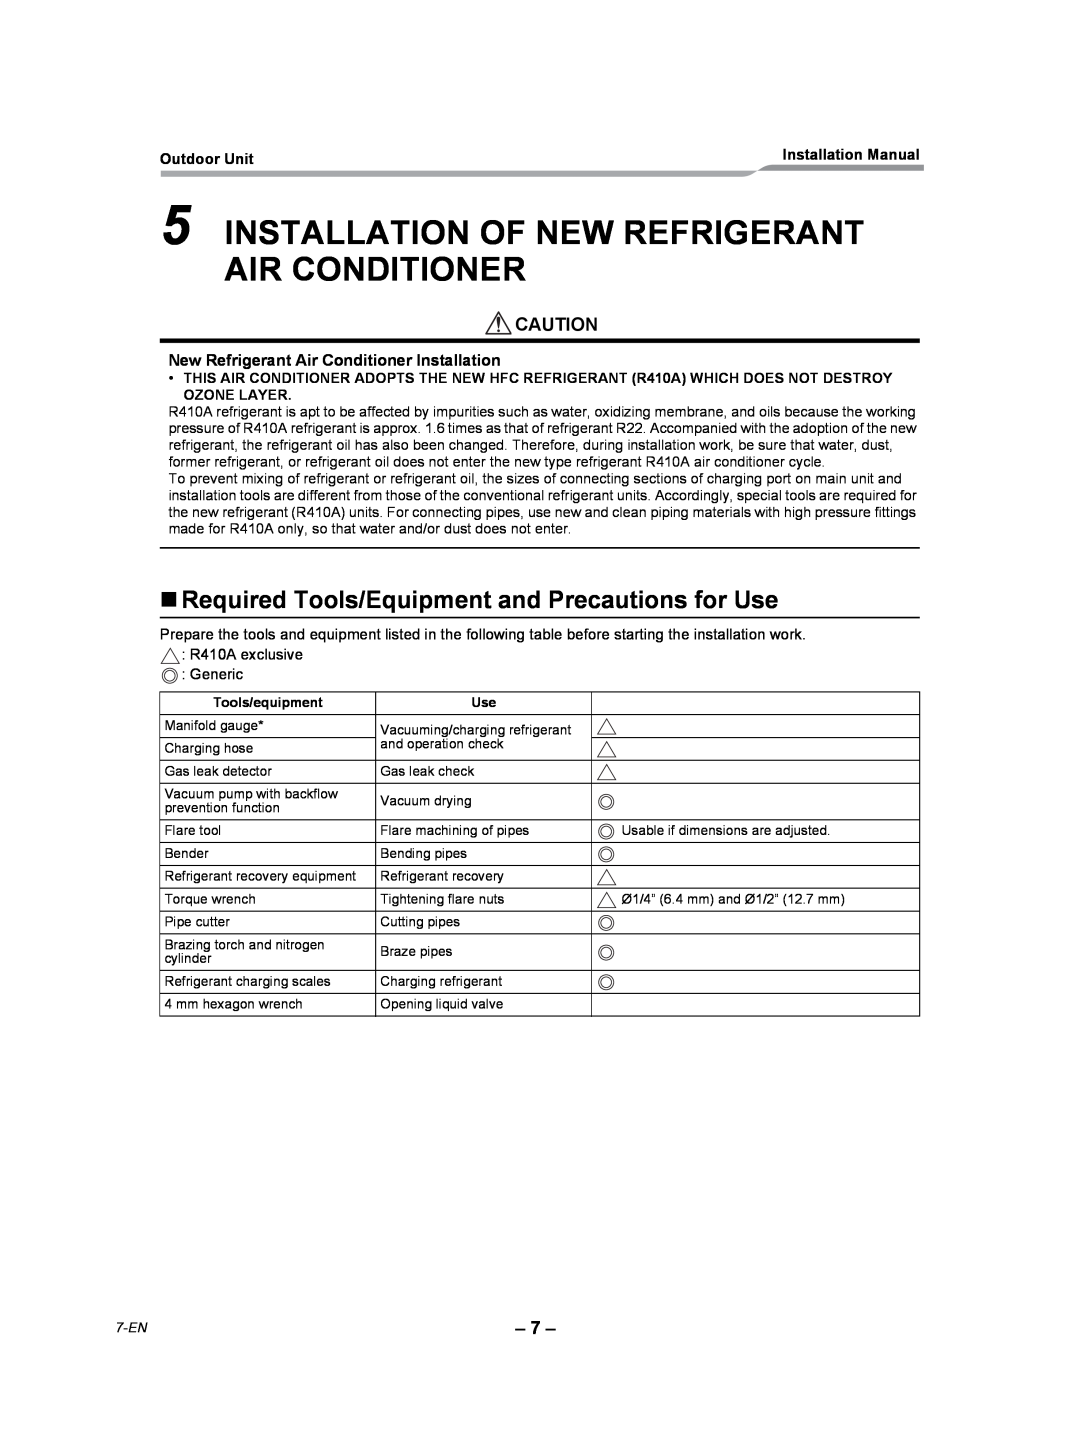 Toshiba RAV-SP180AT2-UL Installation Of New Refrigerant Air Conditioner, „Required Tools/Equipment and Precautions for Use 